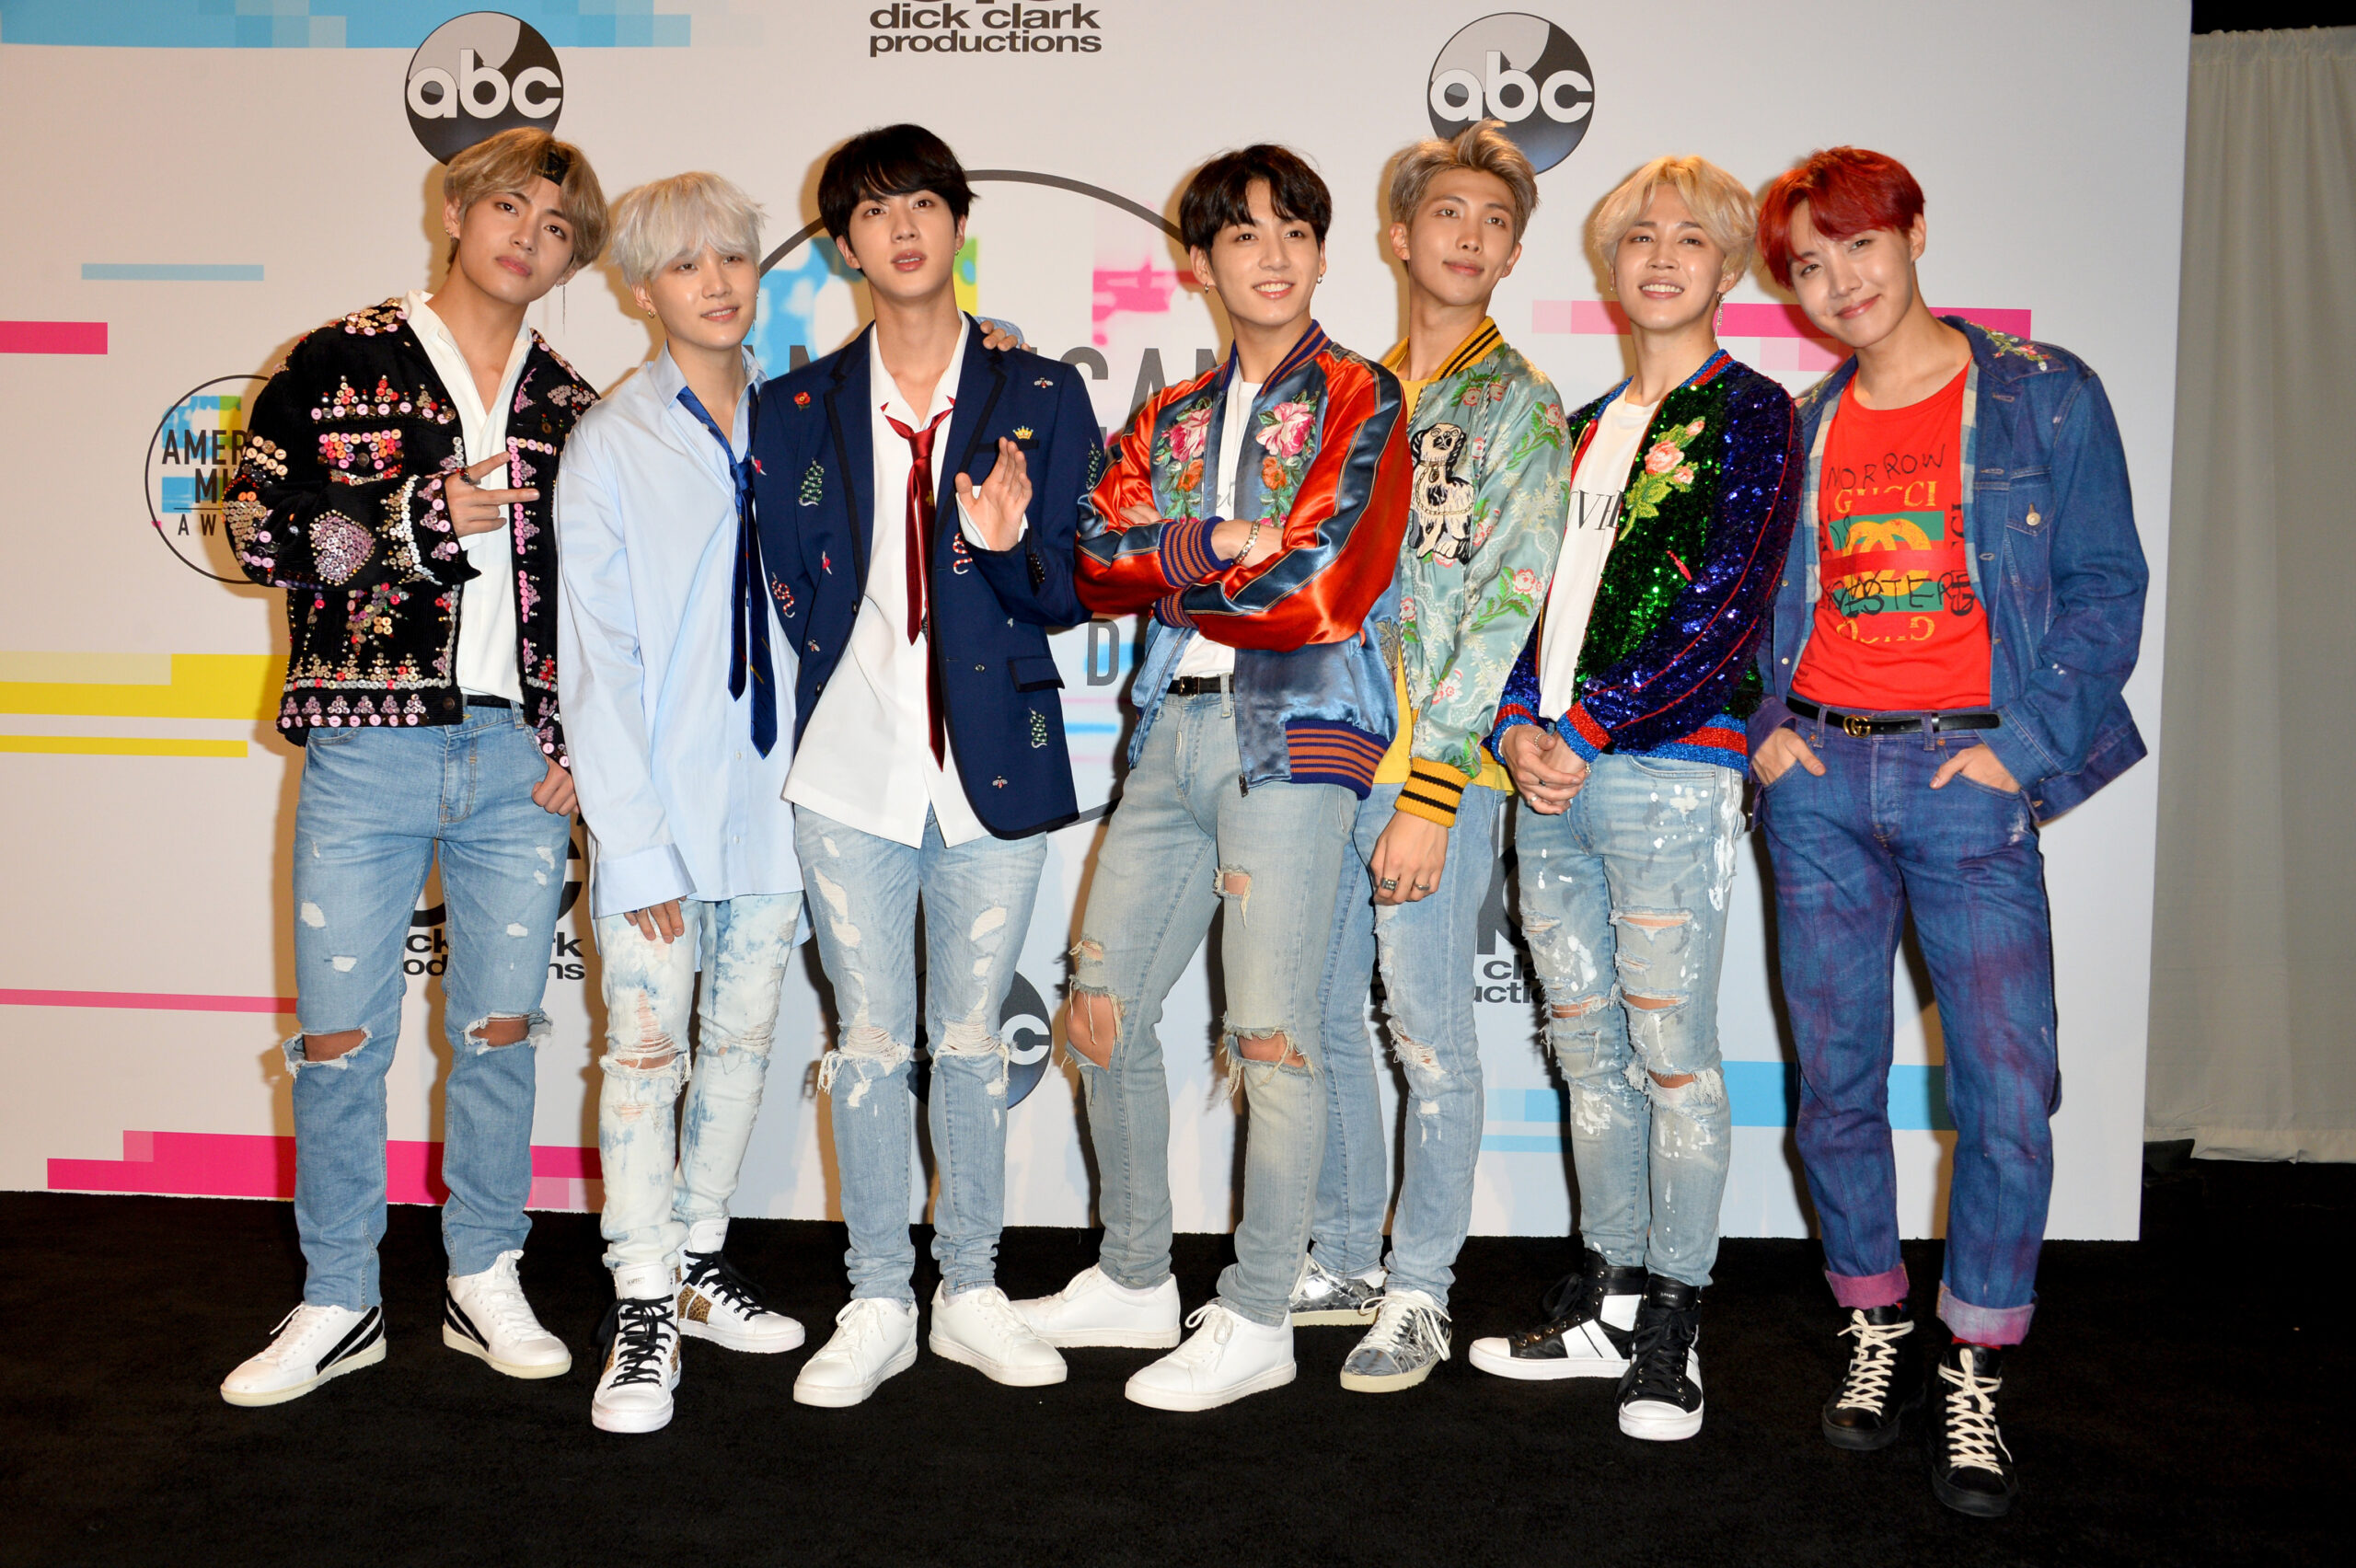 <p>BTS, one of the most popular K-pop bands, started their tour in August 2018, promoting their praised Love Yourself albums. On average, their concert tickets sell for $823, but prices skyrocketed during their 2018 Love Yourself World Tour. For instance, a ticket for their Chicago show was sold for $3,850.</p>